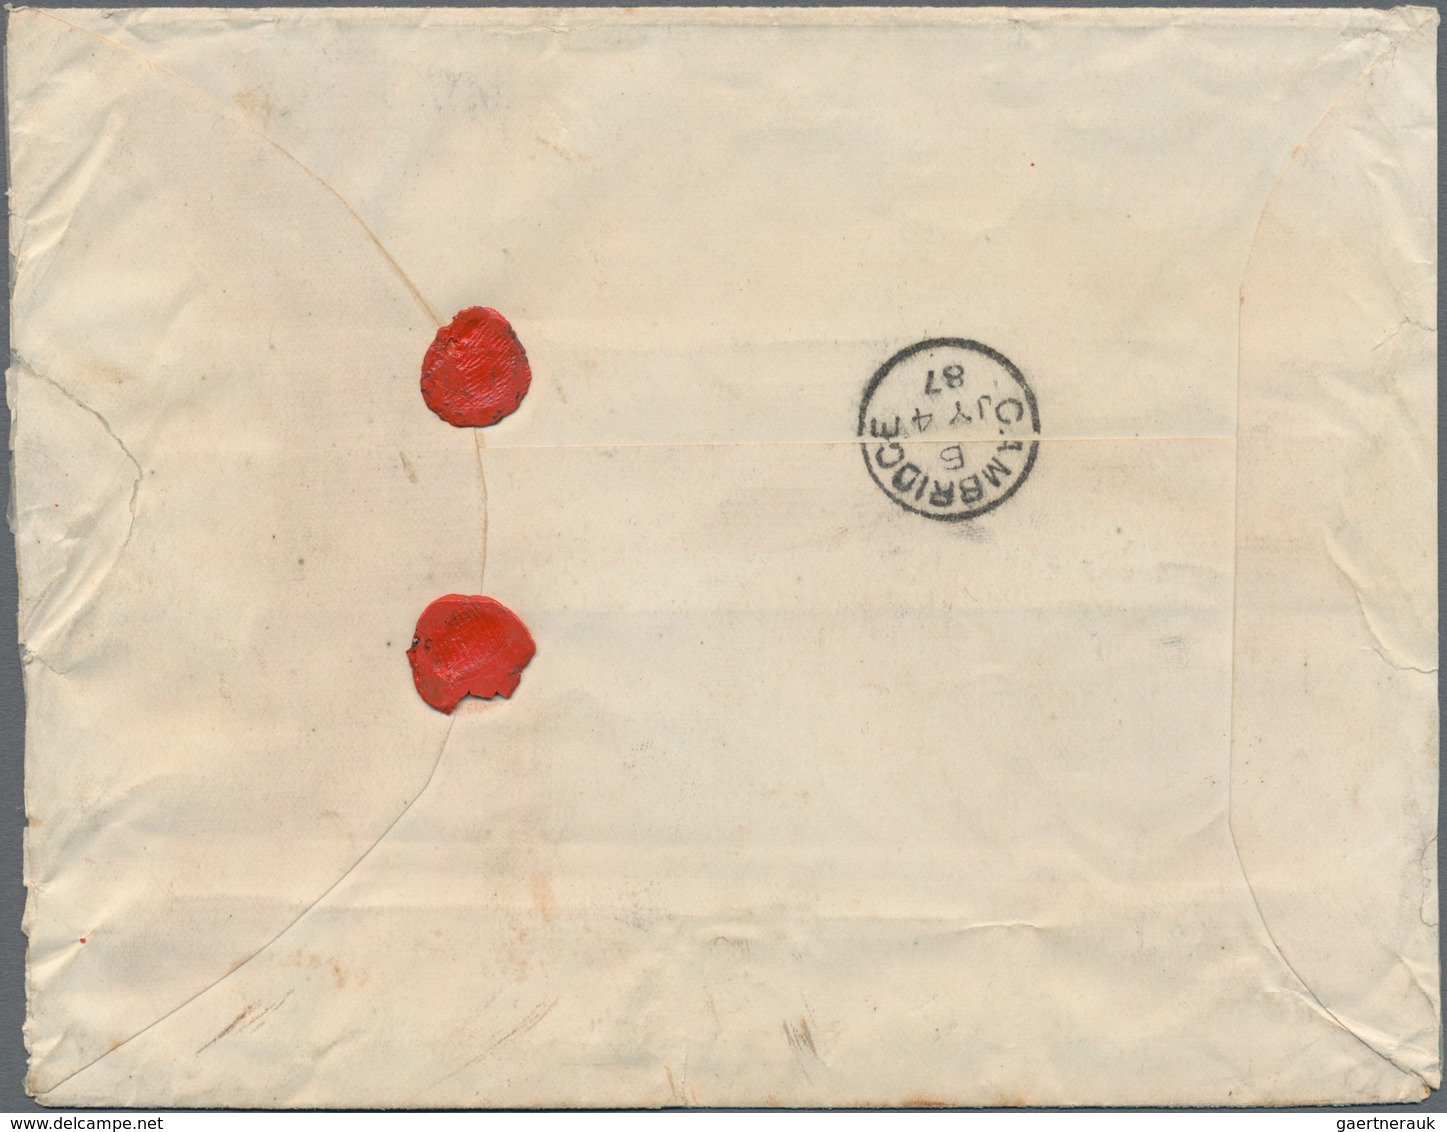 Malaiische Staaten - Straits Settlements: 1887, Triple-weight Cover From Penang To England 'Per Parc - Straits Settlements